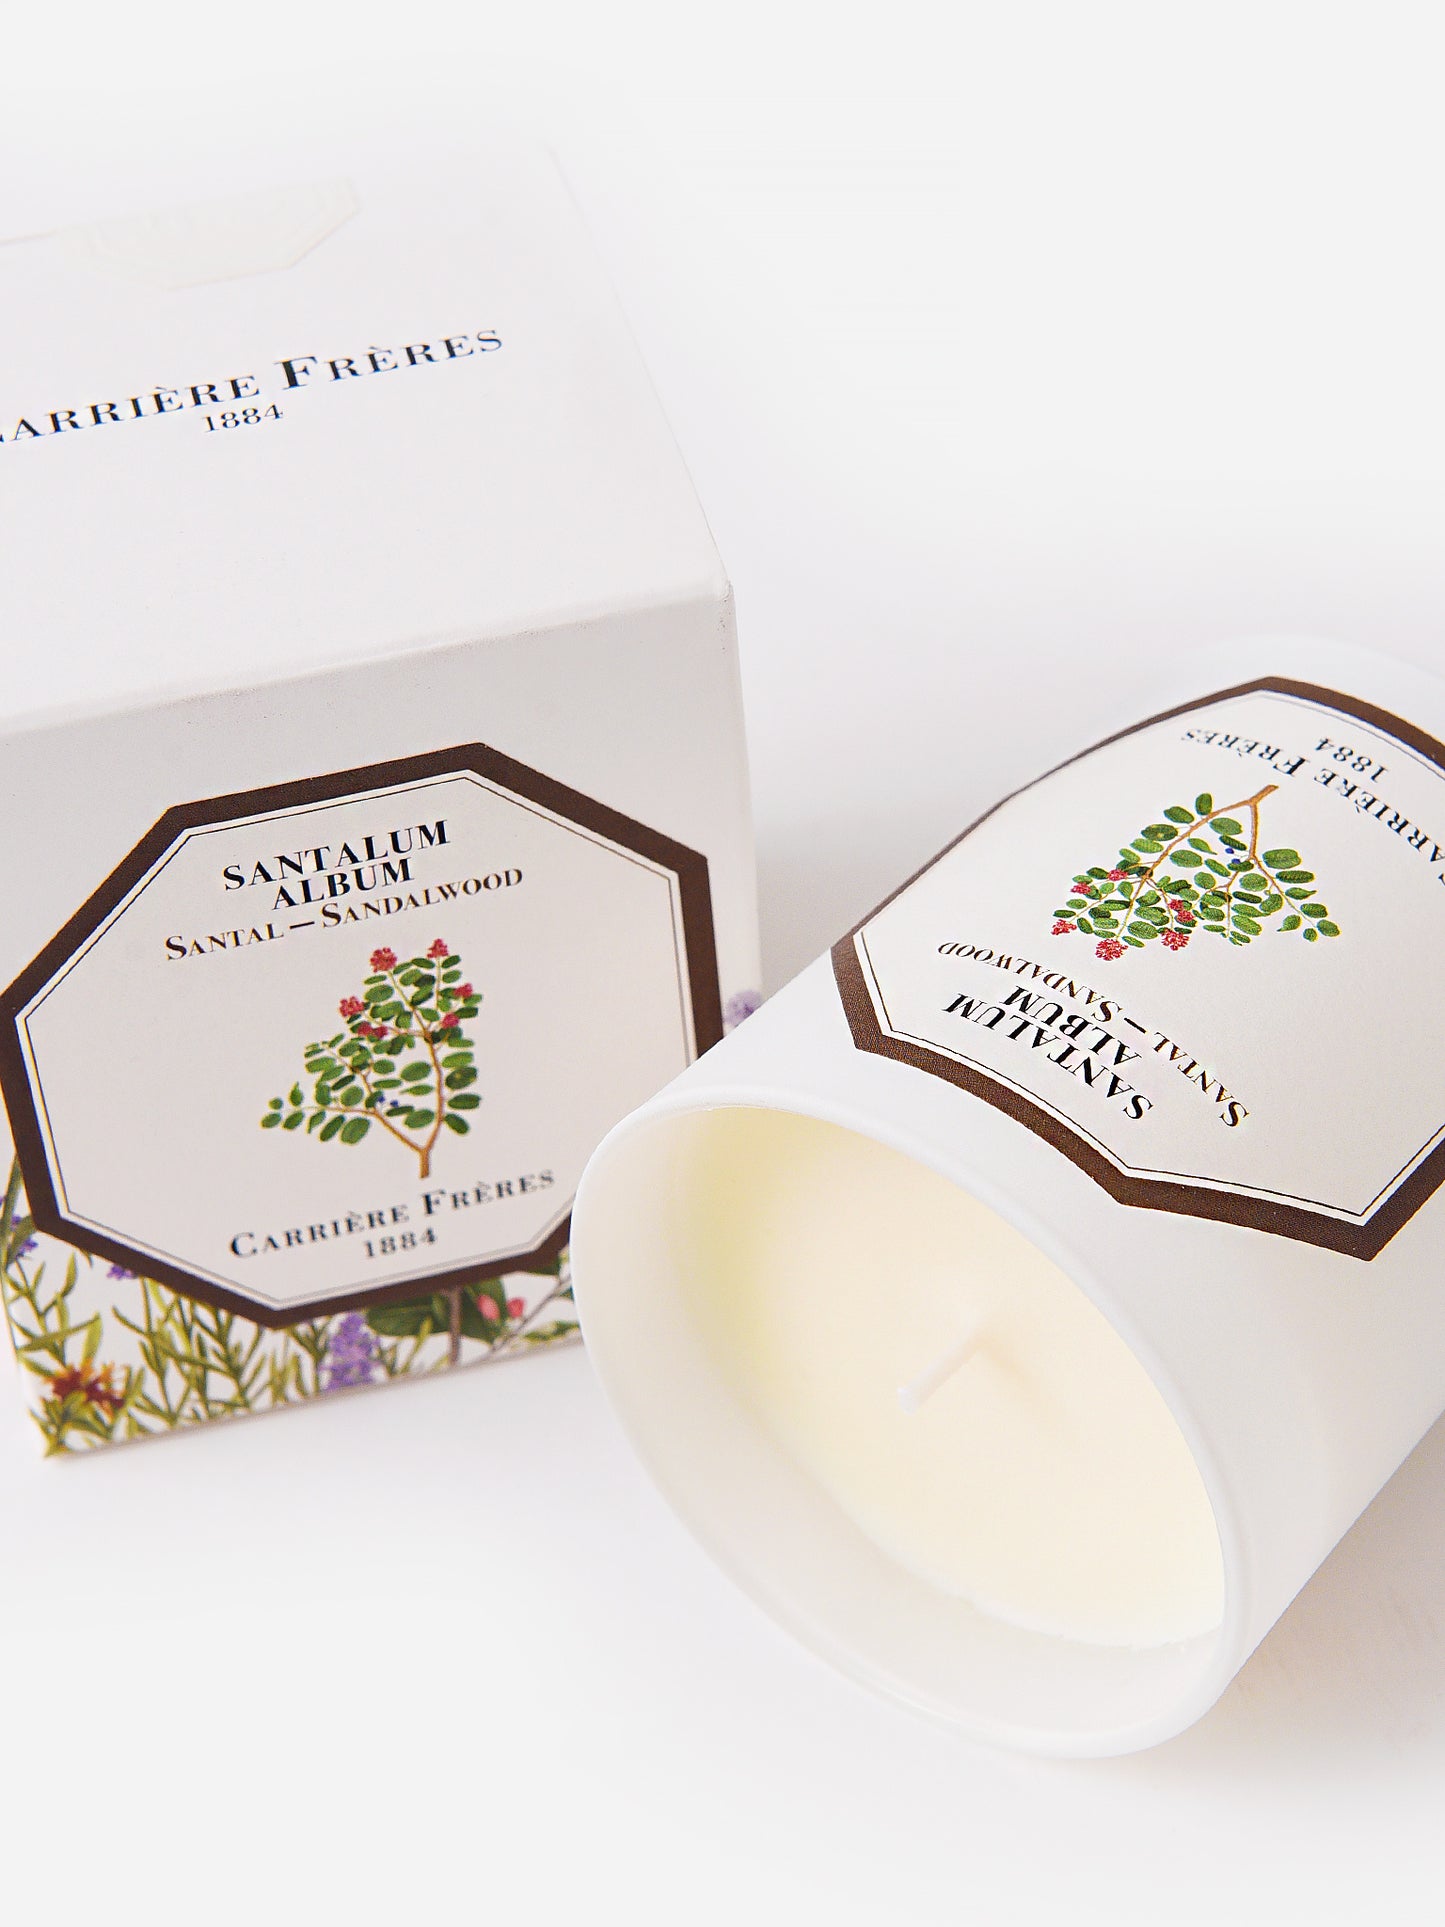 Carriere Freres Sandalwood Candle